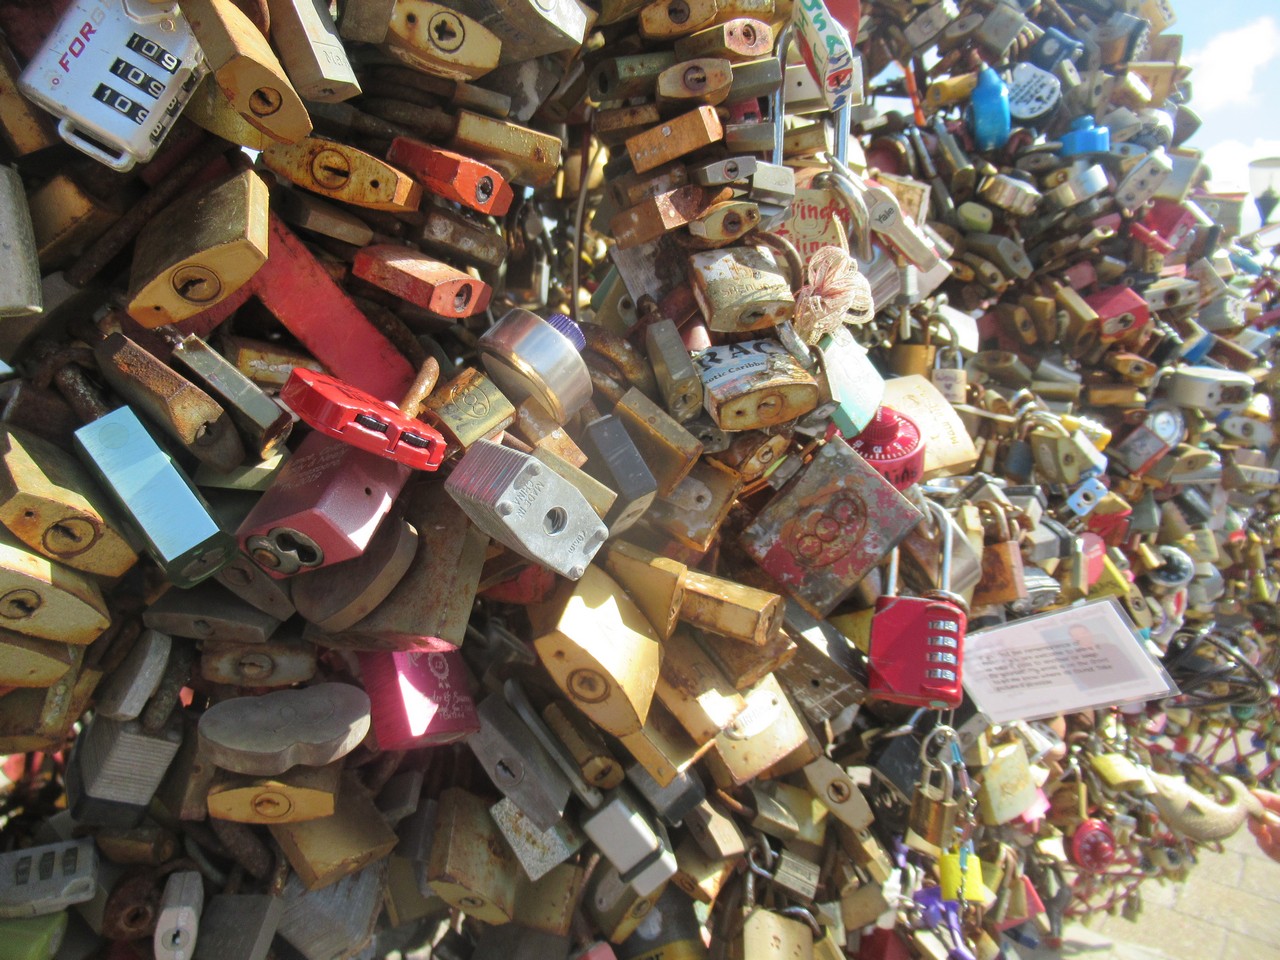 There is lots of love locked up here.